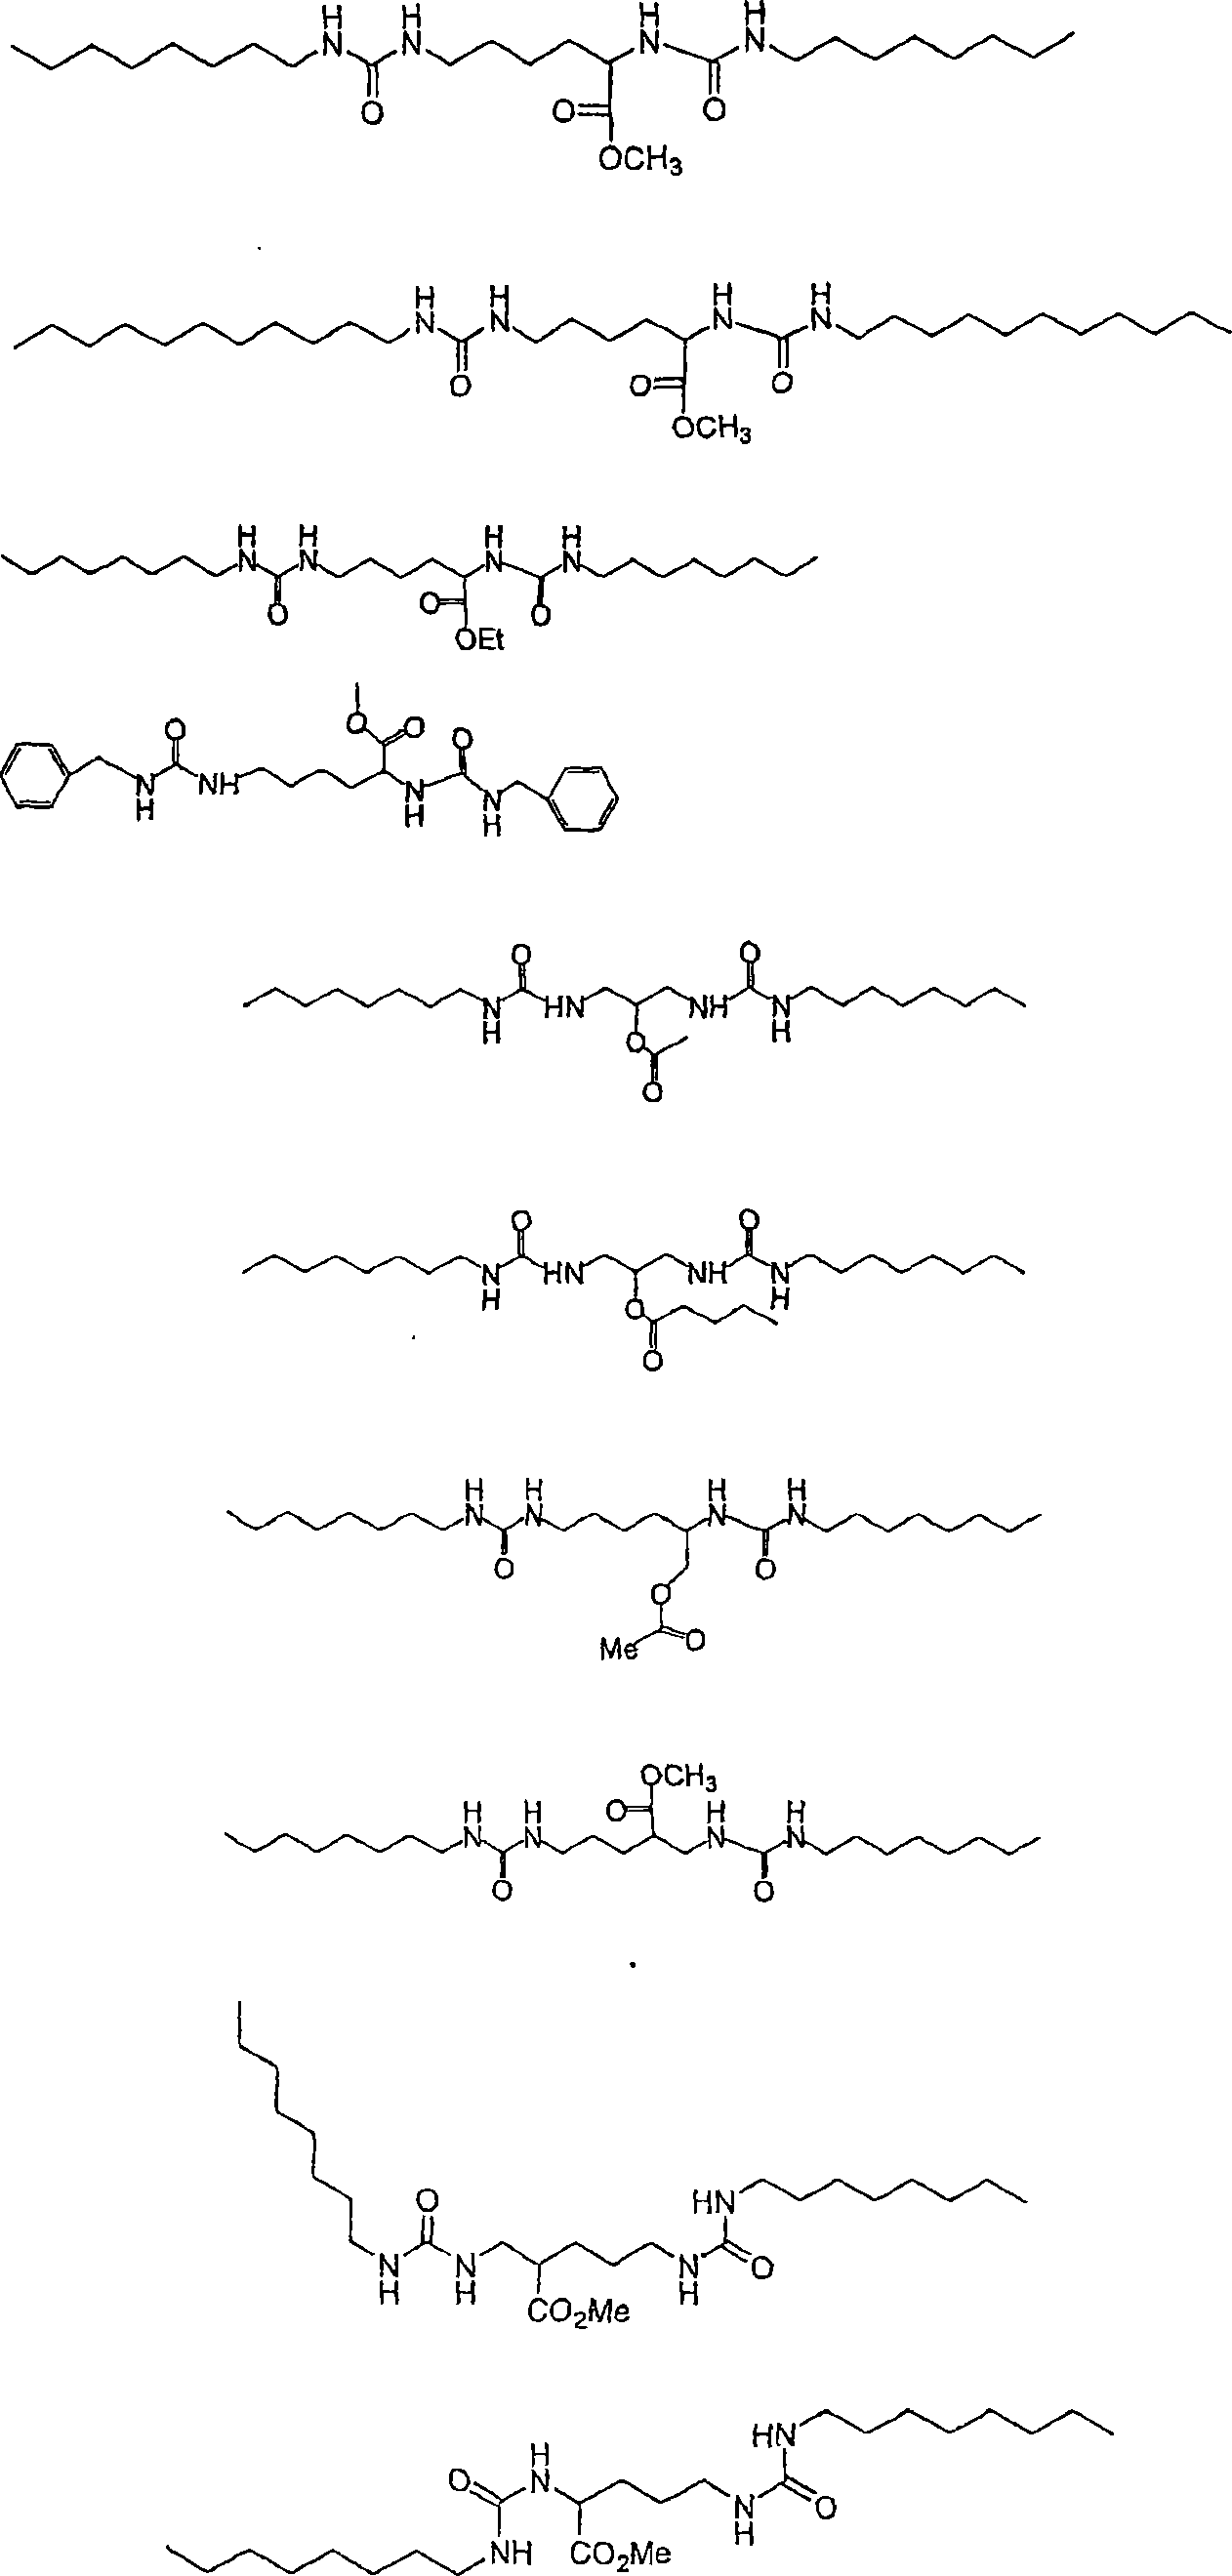 Coating compositions containing rheology control agents